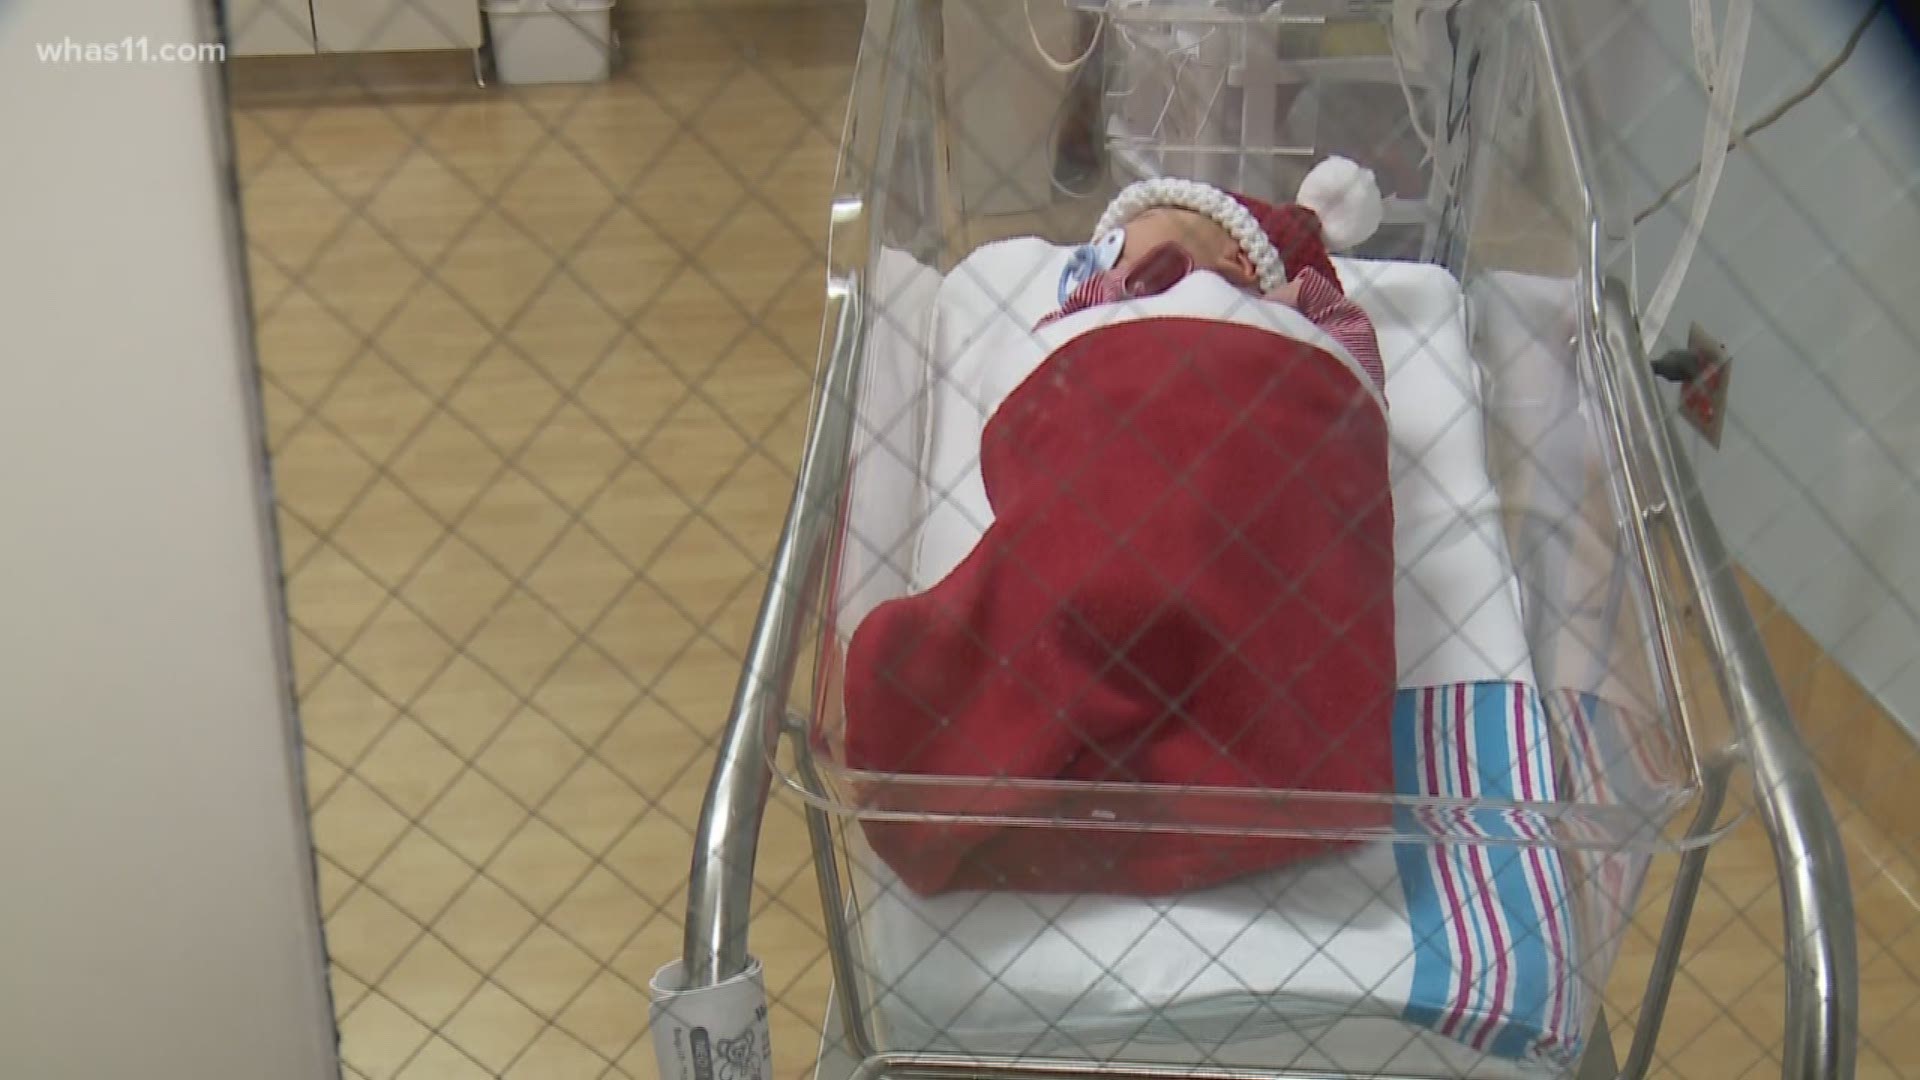 For the last 27 years, staff members at Baptist Health Louisville have been placing infants into a stocking on Christmas Eve.